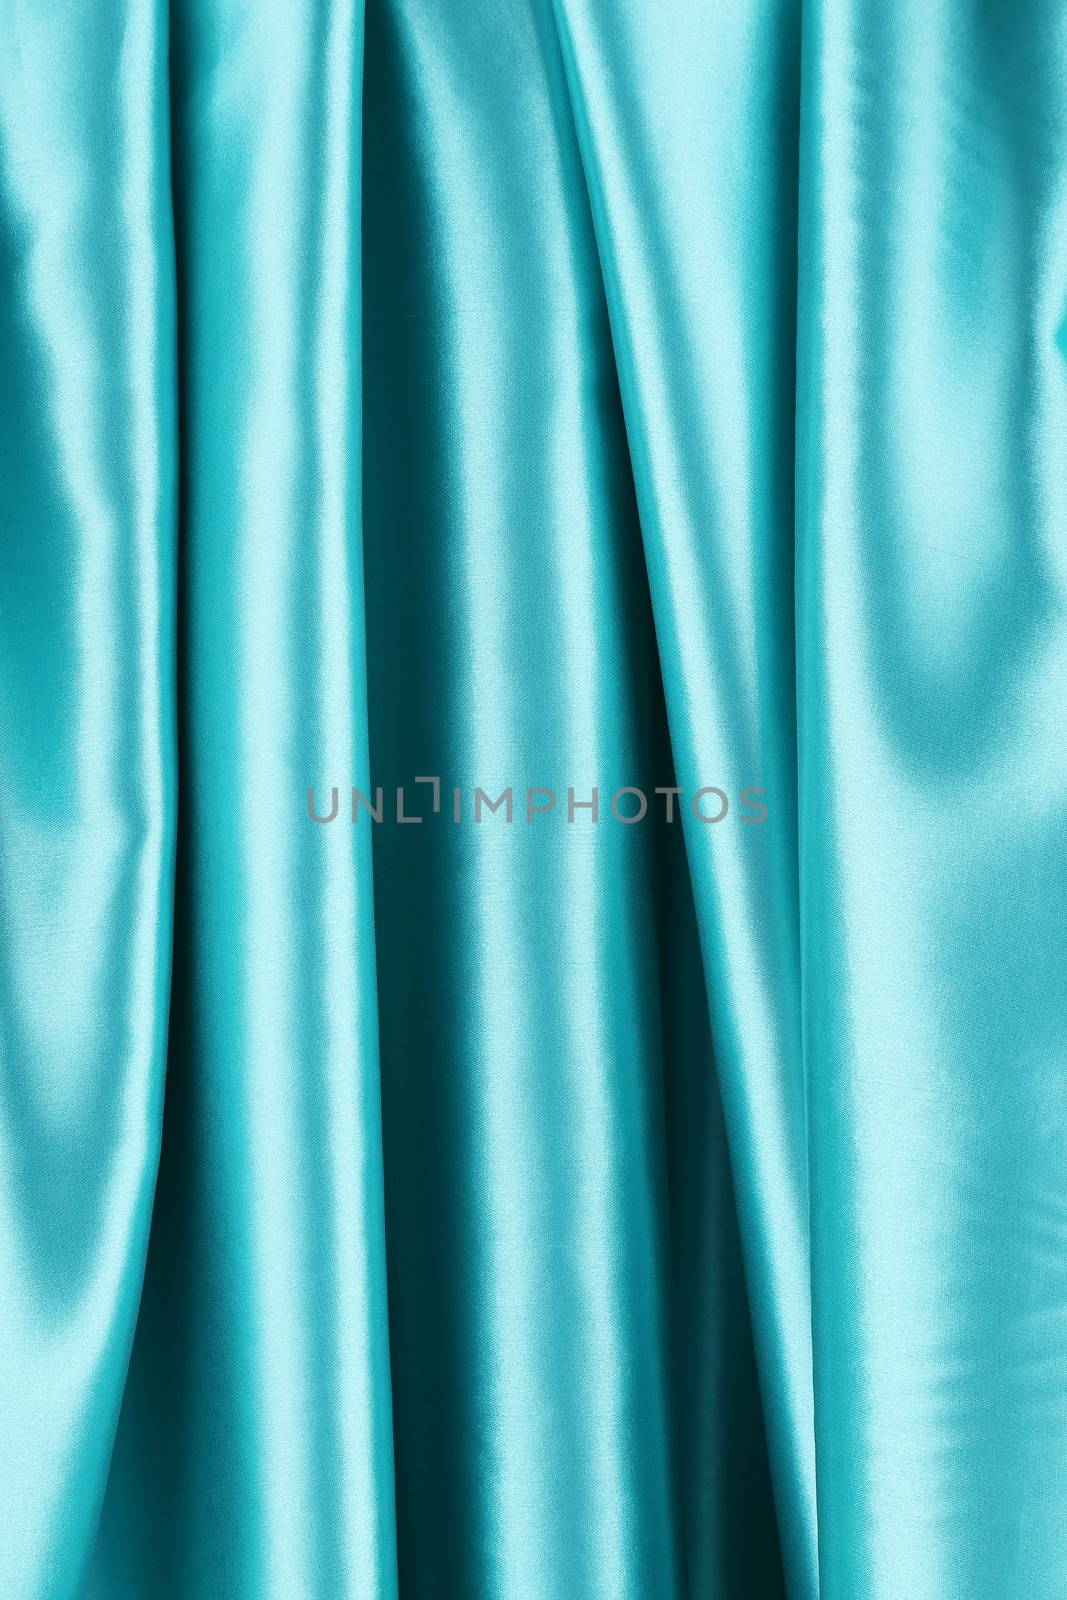 Creases in blue fabric. by indigolotos